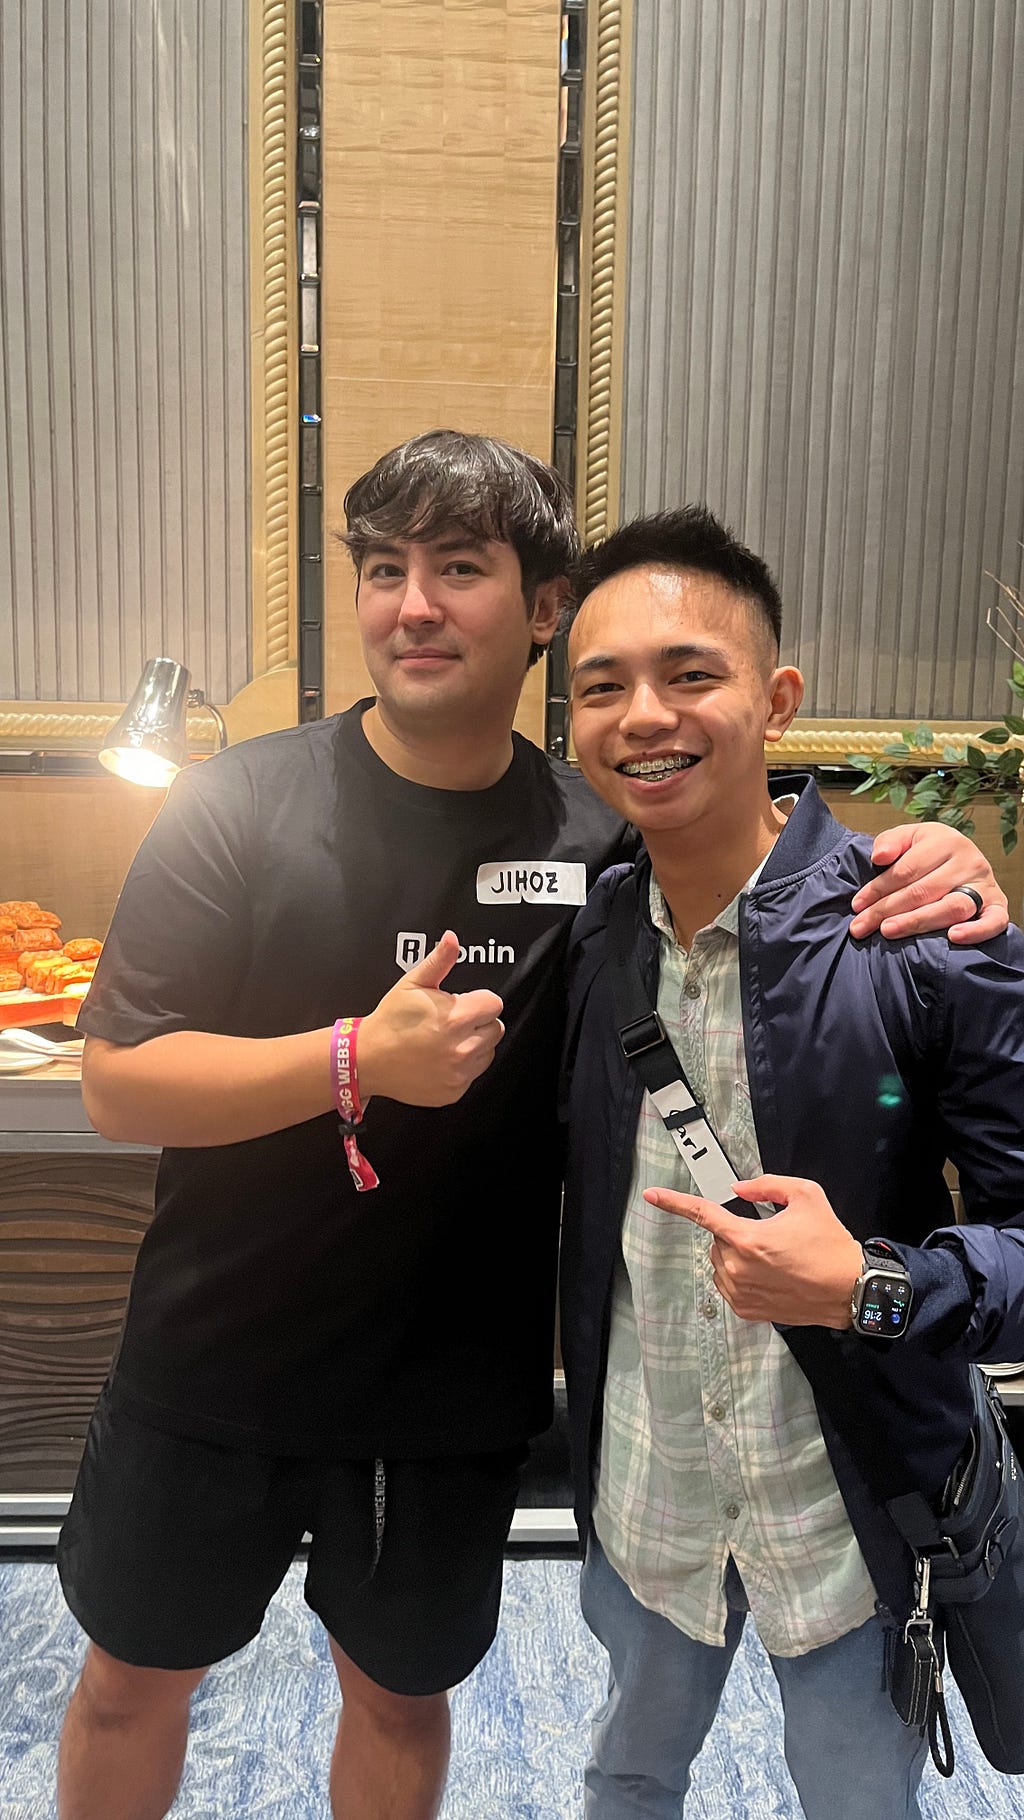 Jihoz, the founder of Axie Infinity with Ceo of AltSwitch — Carl Munsayac